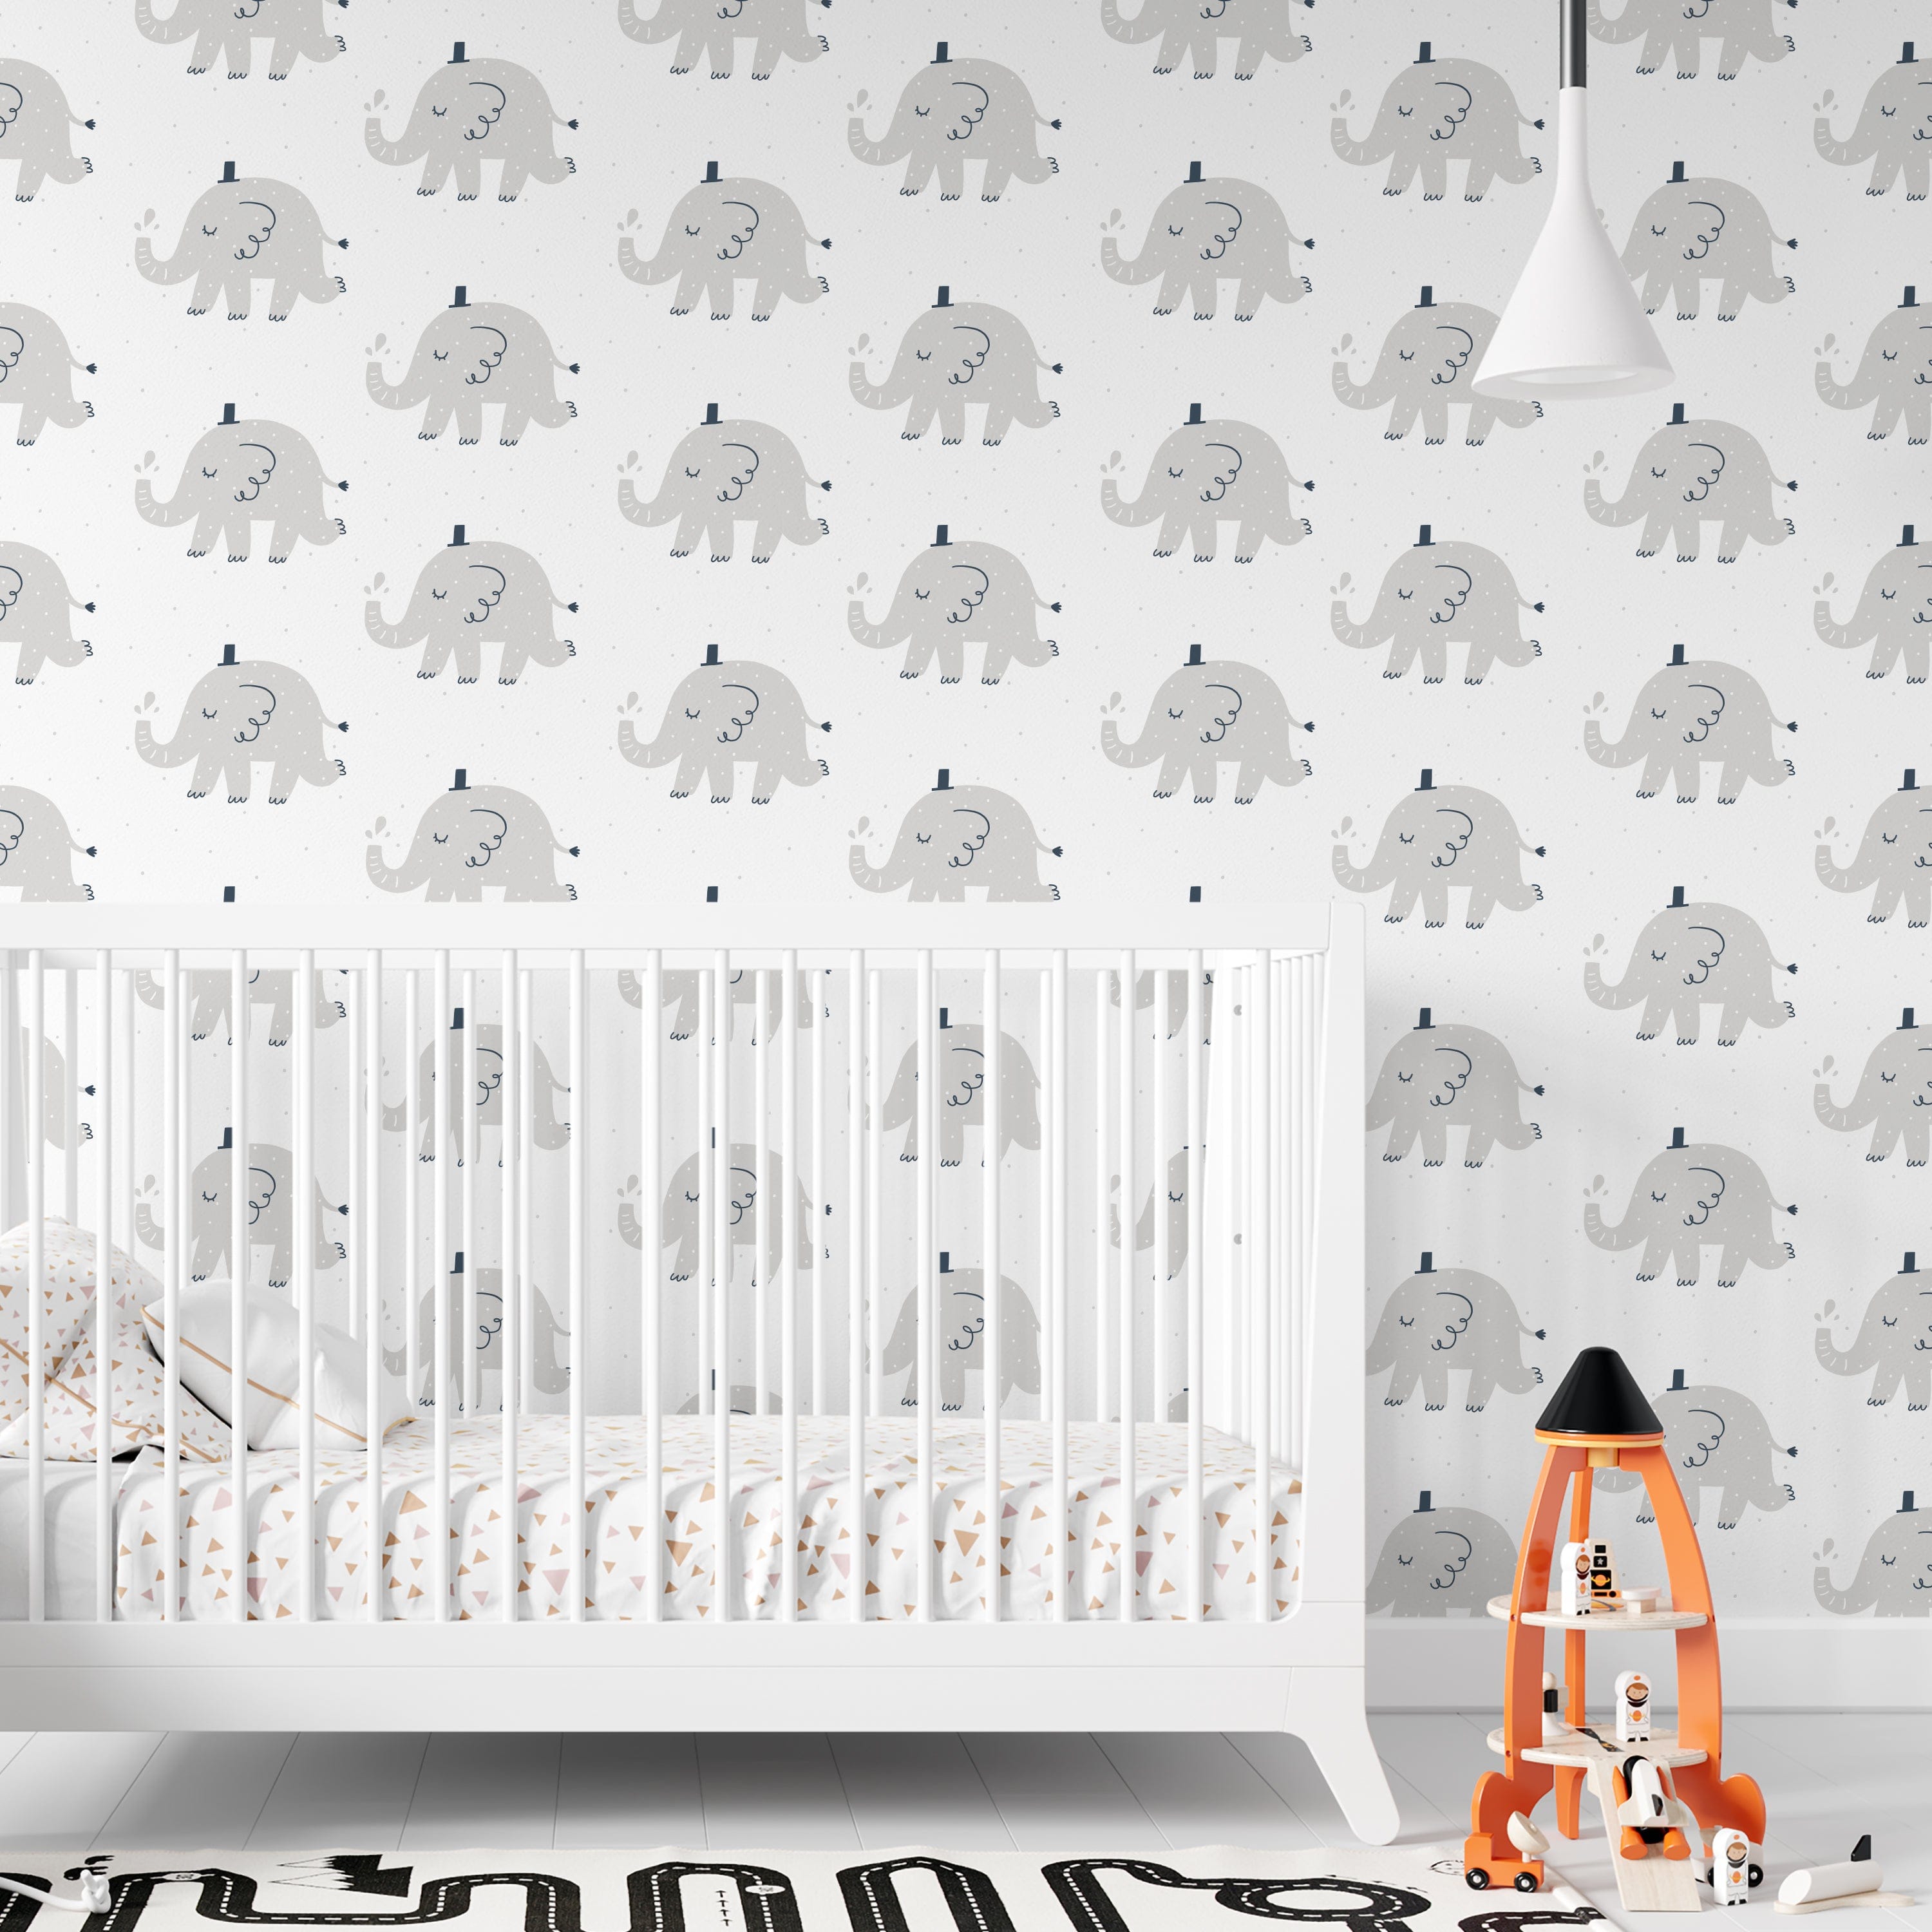 Elephant Party Wallpaper in a nursery setting, depicting charming gray elephants on a white background, complemented by a white crib and playful children's decor, creating a gentle and joyful atmosphere.